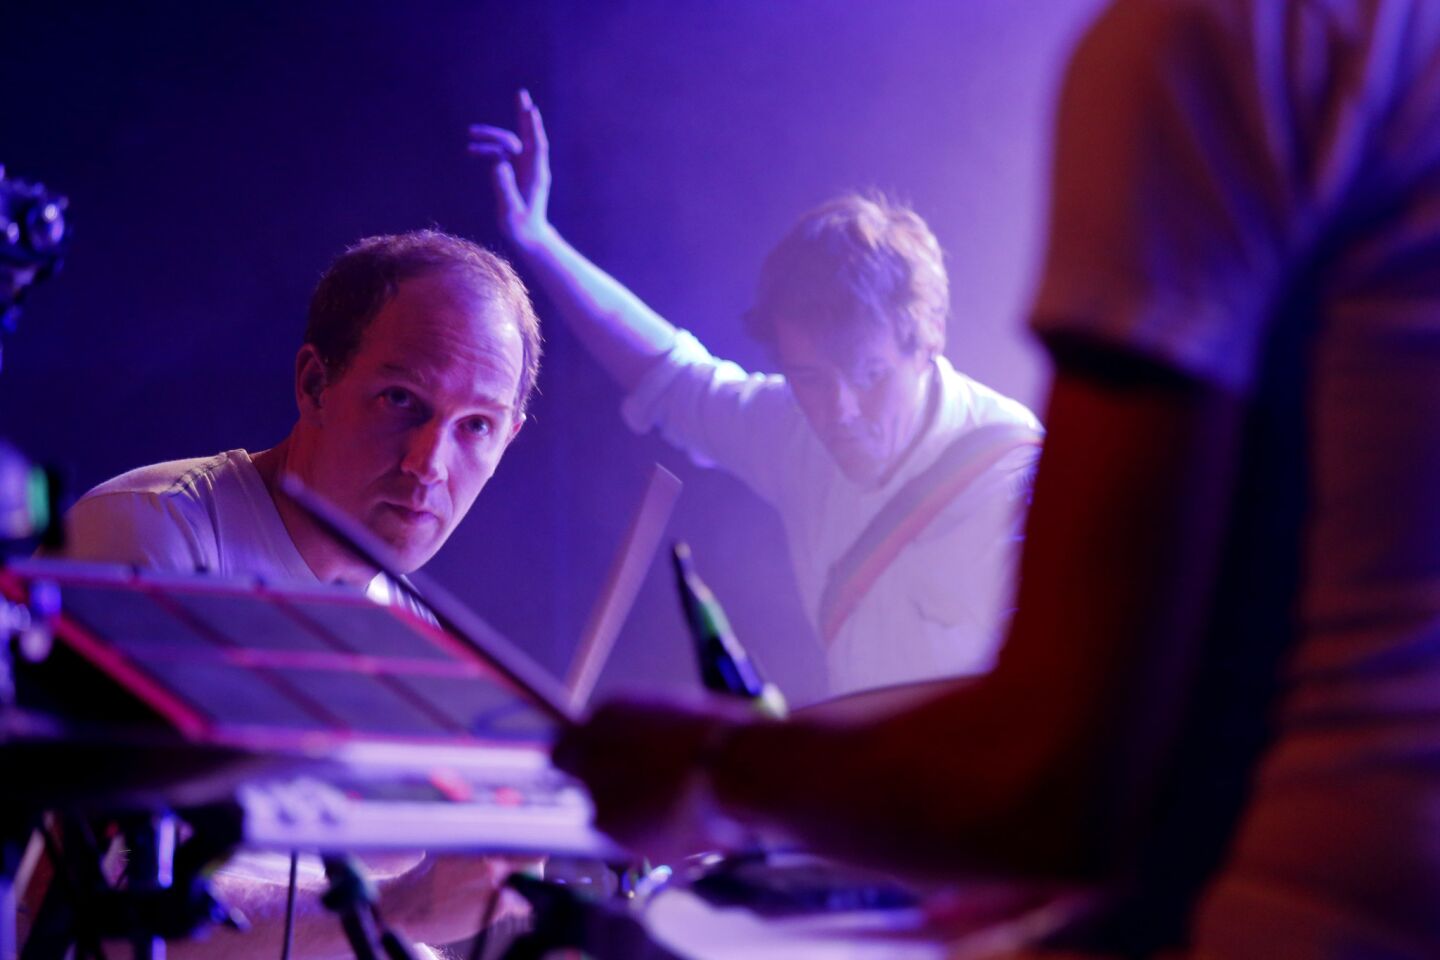 Caribou performs at the Fonda Theater in Hollywood on Feb. 26.